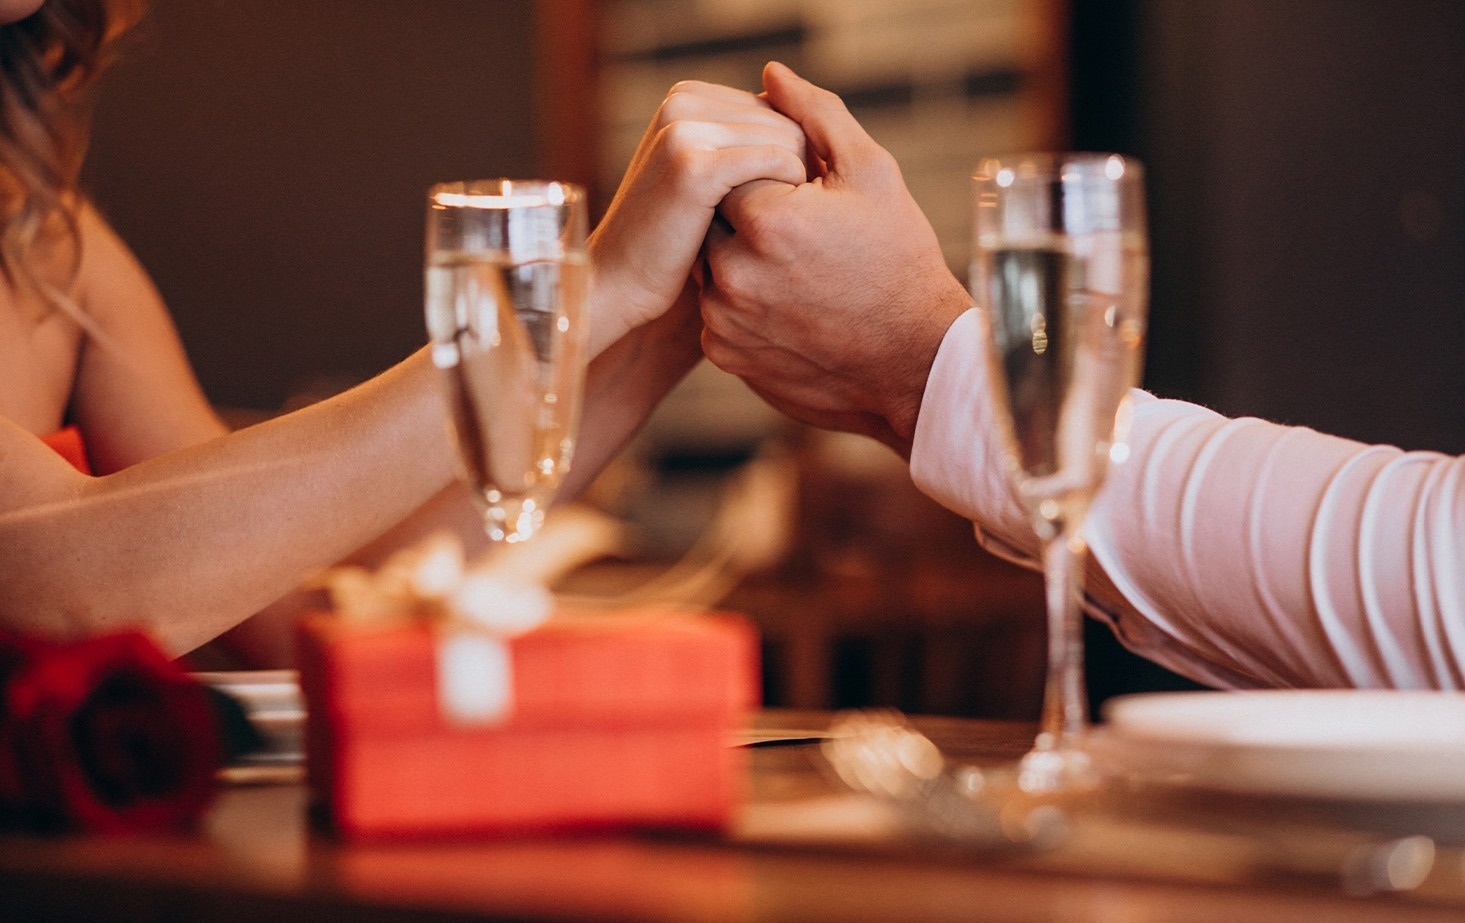 a man and woman are holding hands at a table with champagne glasses